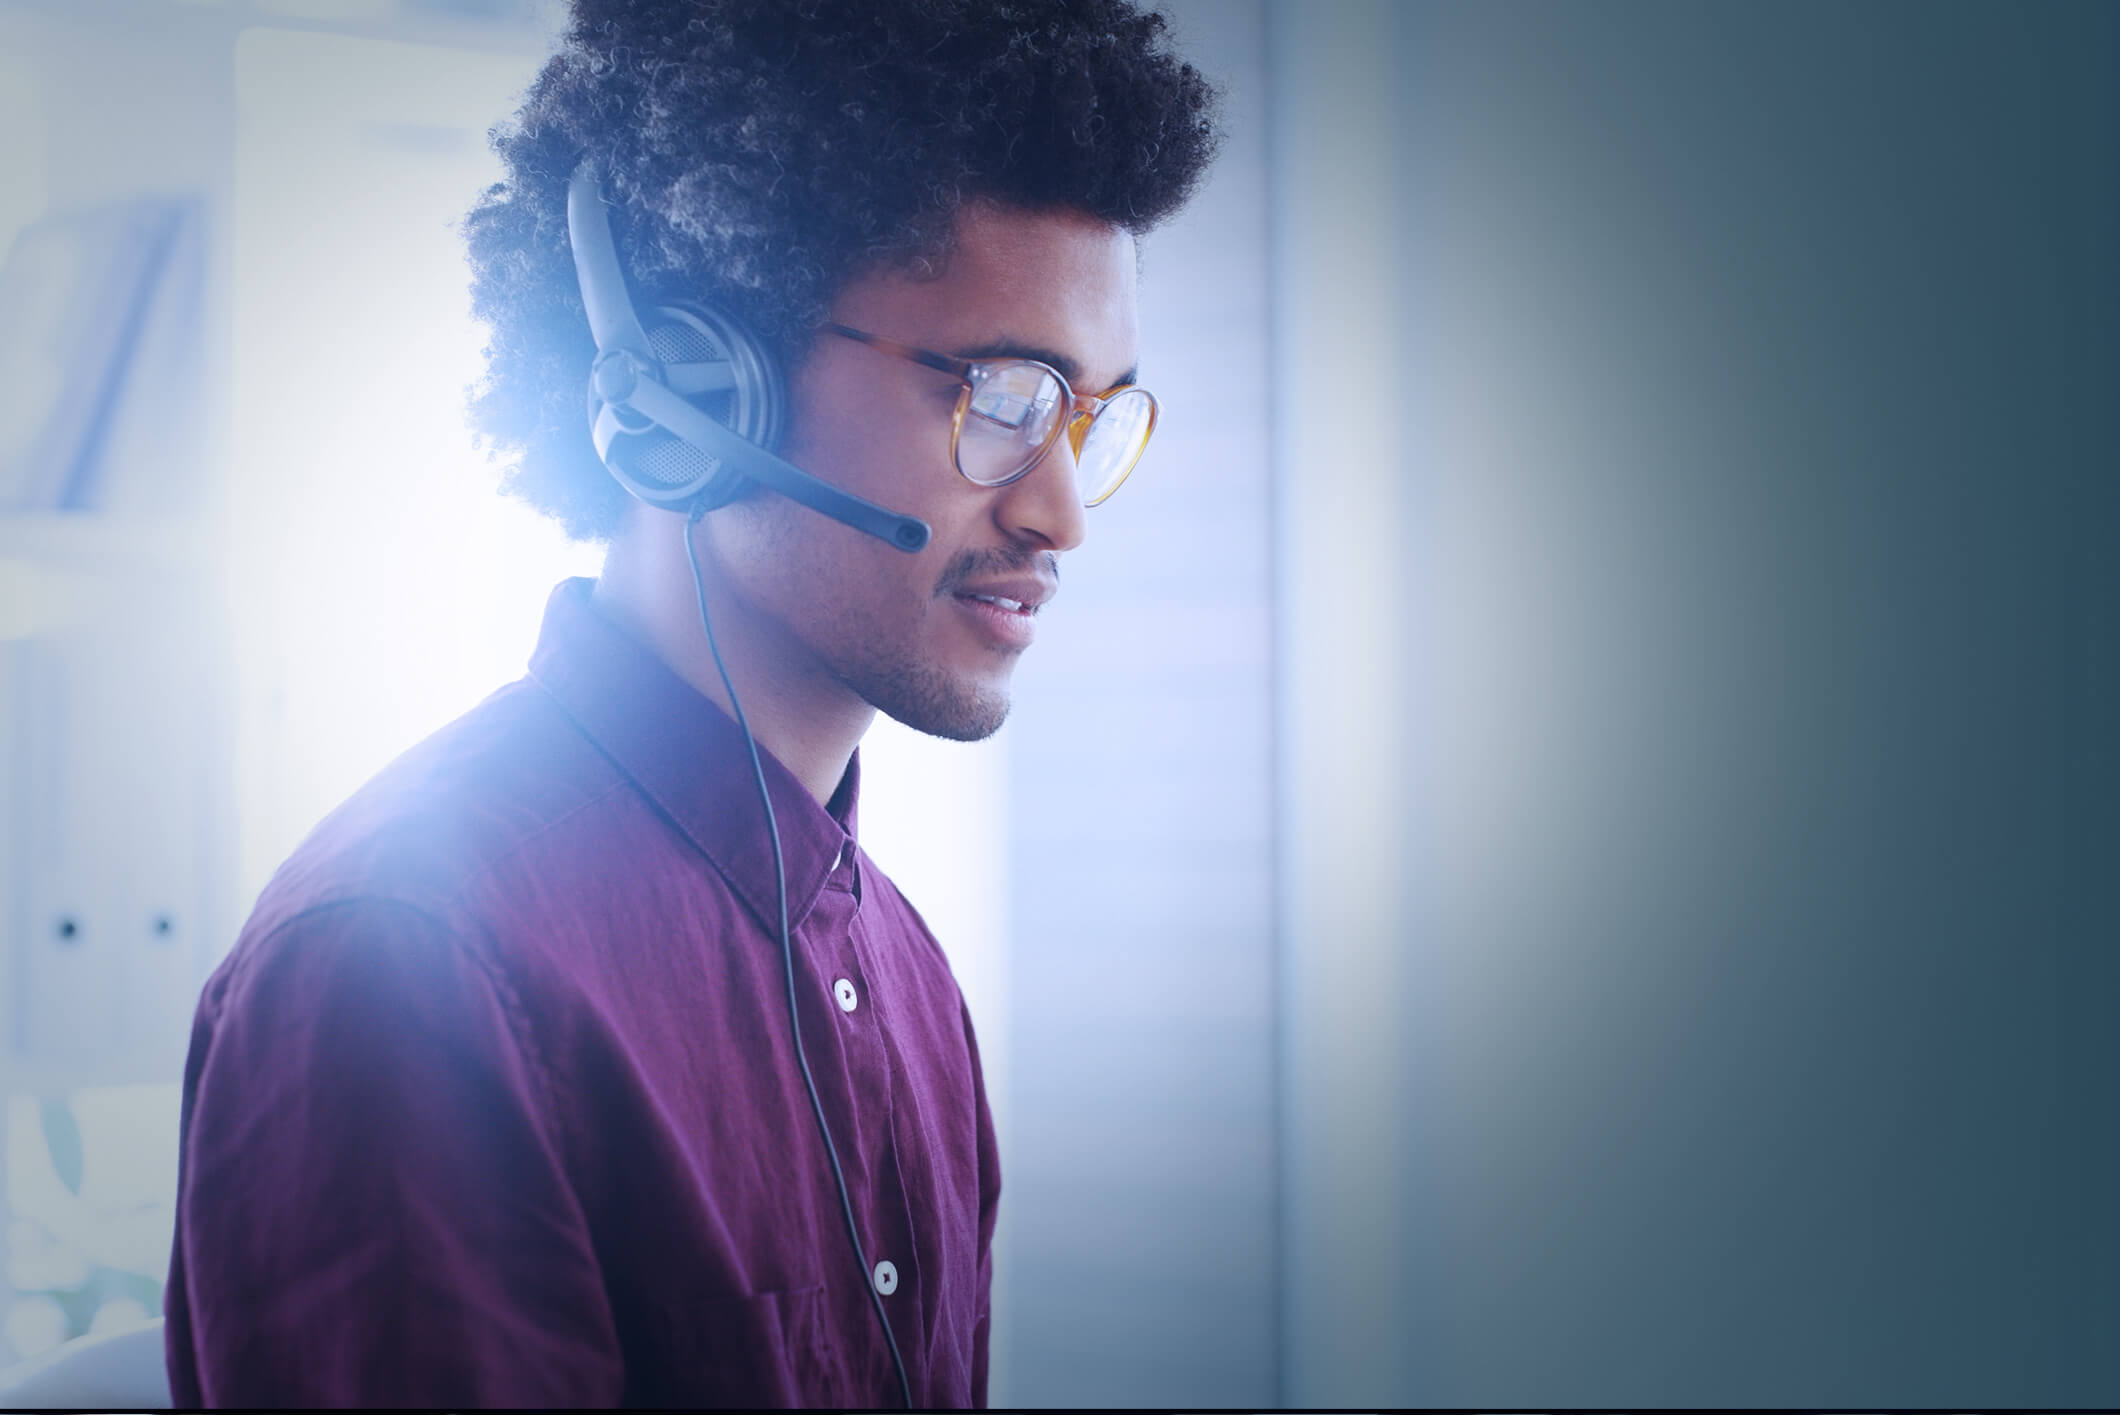 How to launch a modern call center to offer seamless service in times of crisis